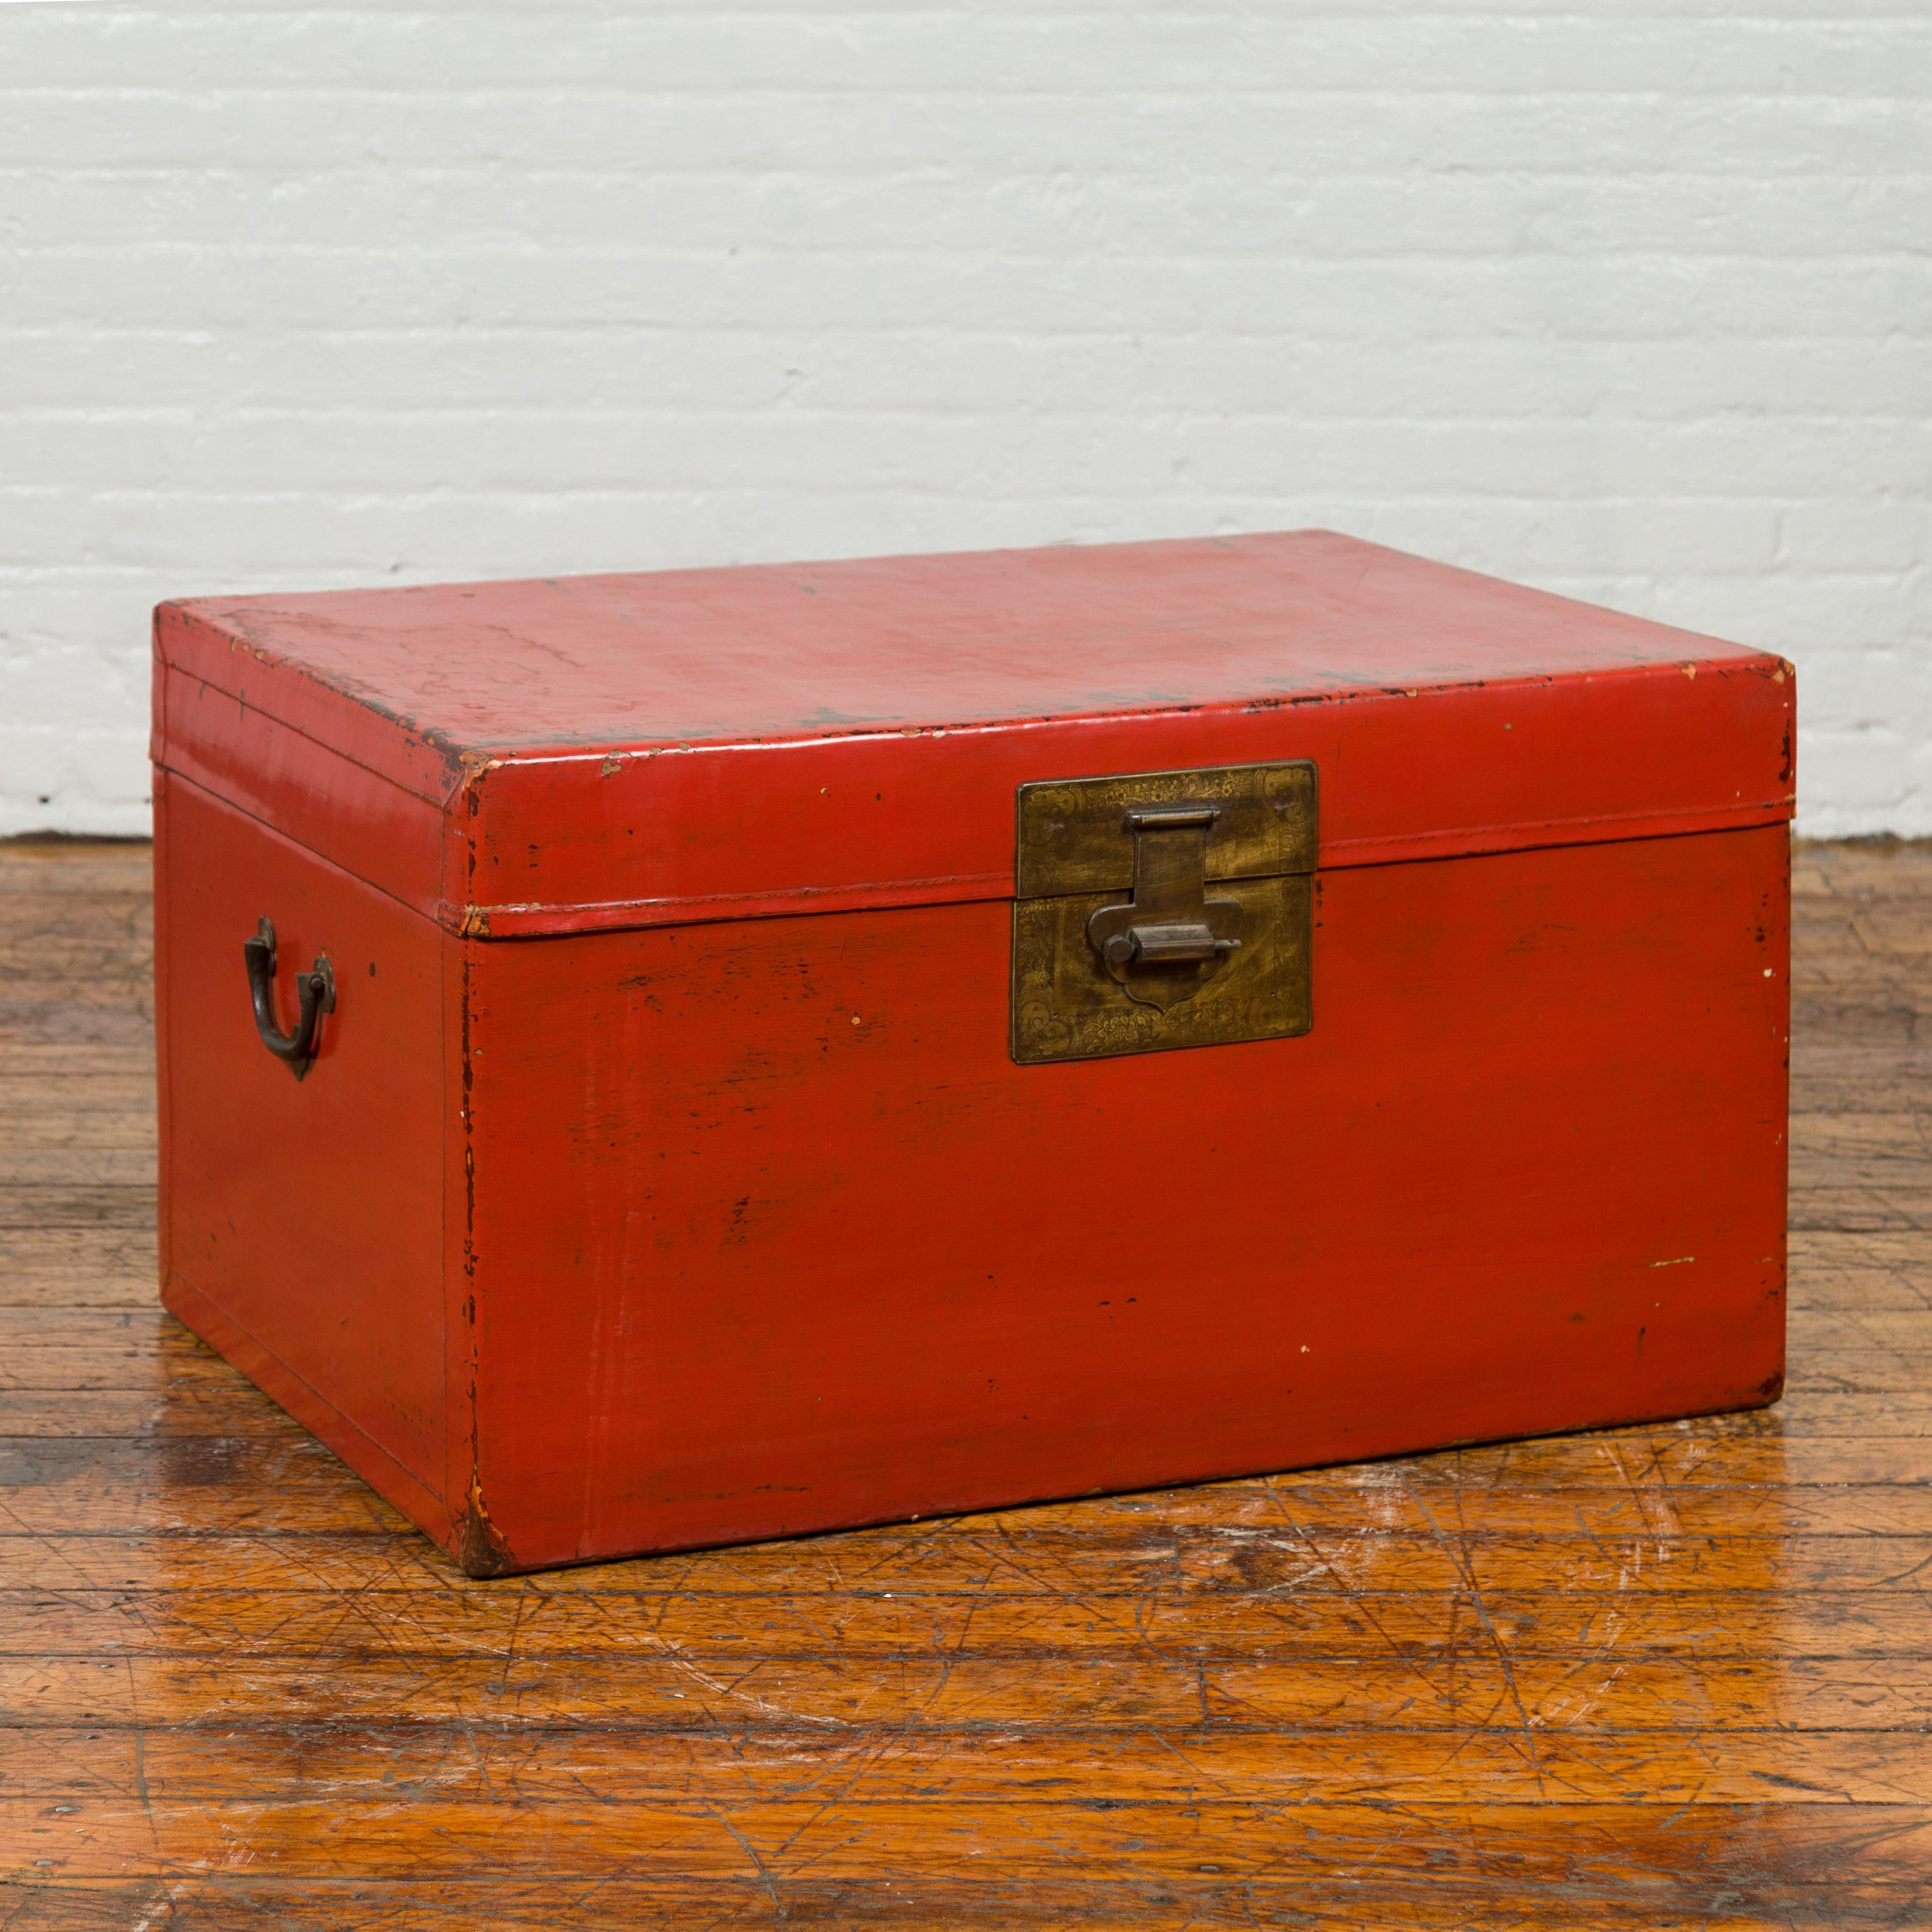 A vintage Chinese red lacquered blanket chest from the mid-20th century with bronze hardware. Created in China during the midcentury period, this blanket chest features a distressed red lacquered finish perfectly complimented by the patinated bronze